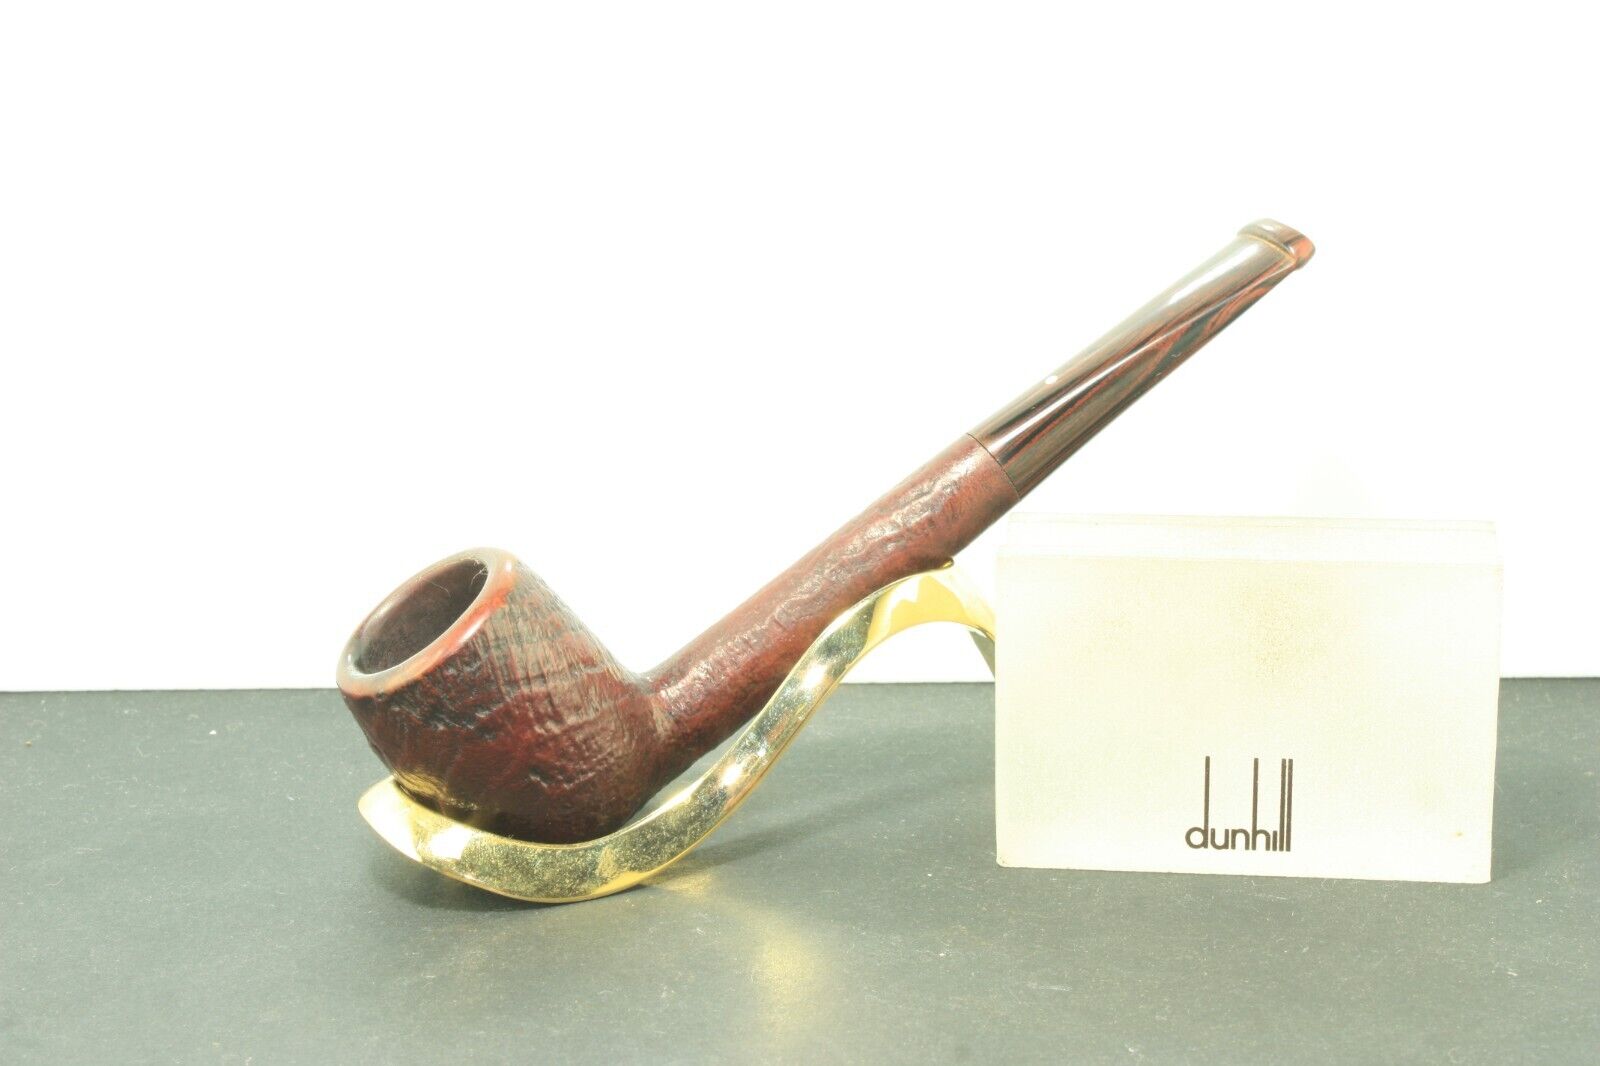 NICE DUNHILL PIPE CUMBERLAND SHAPE 21101 YEAR 1979 TOP CONDITION 